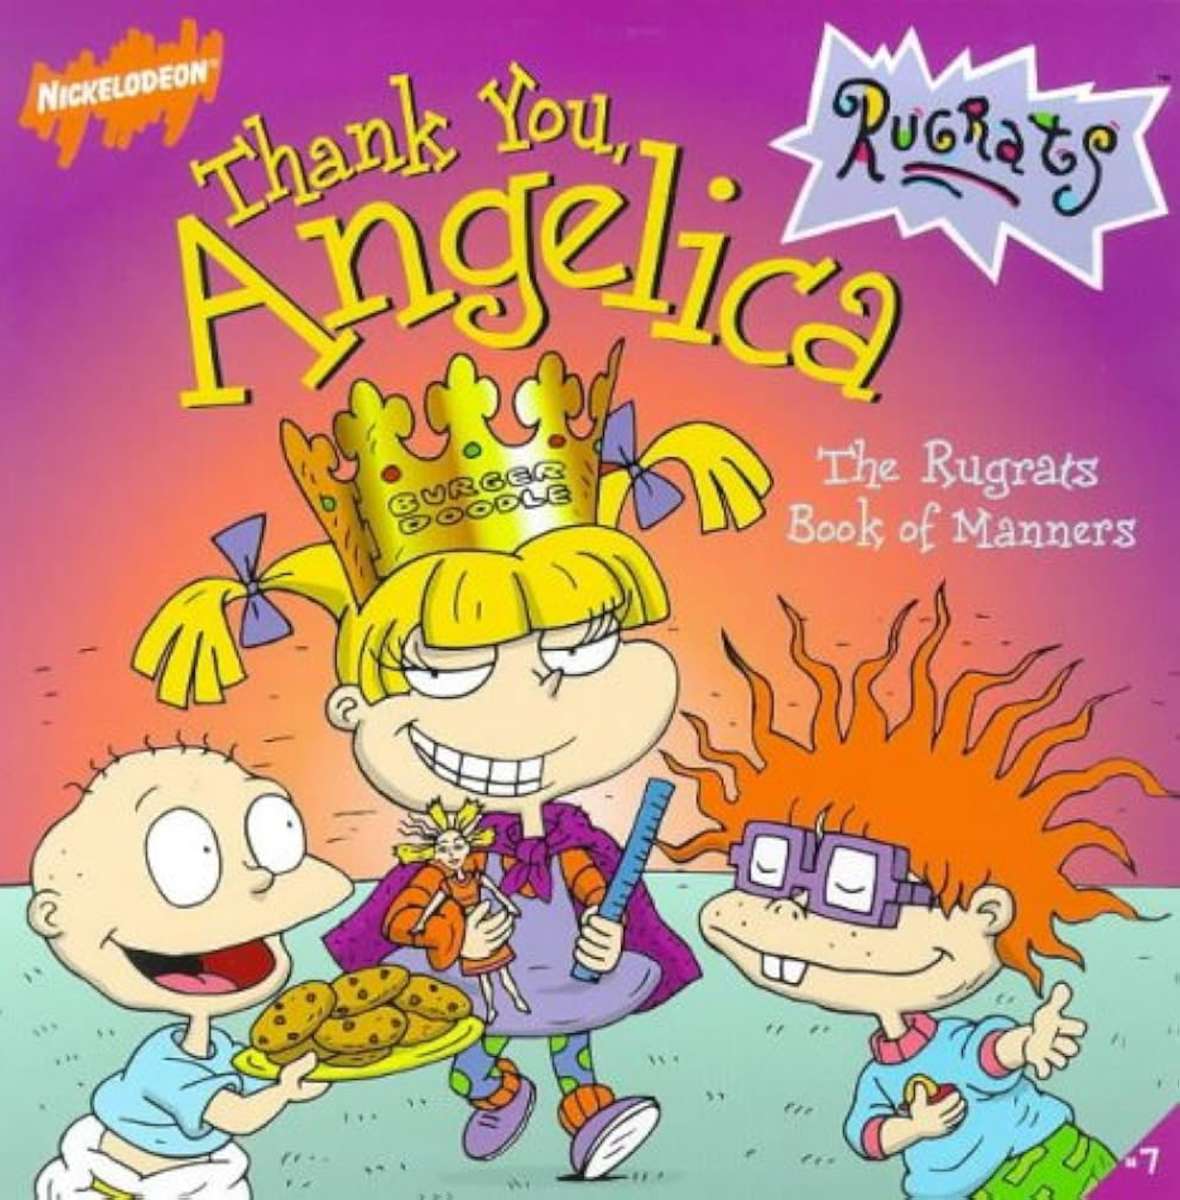 Děkuji Angelica: Rugrats Book of Manners online puzzle